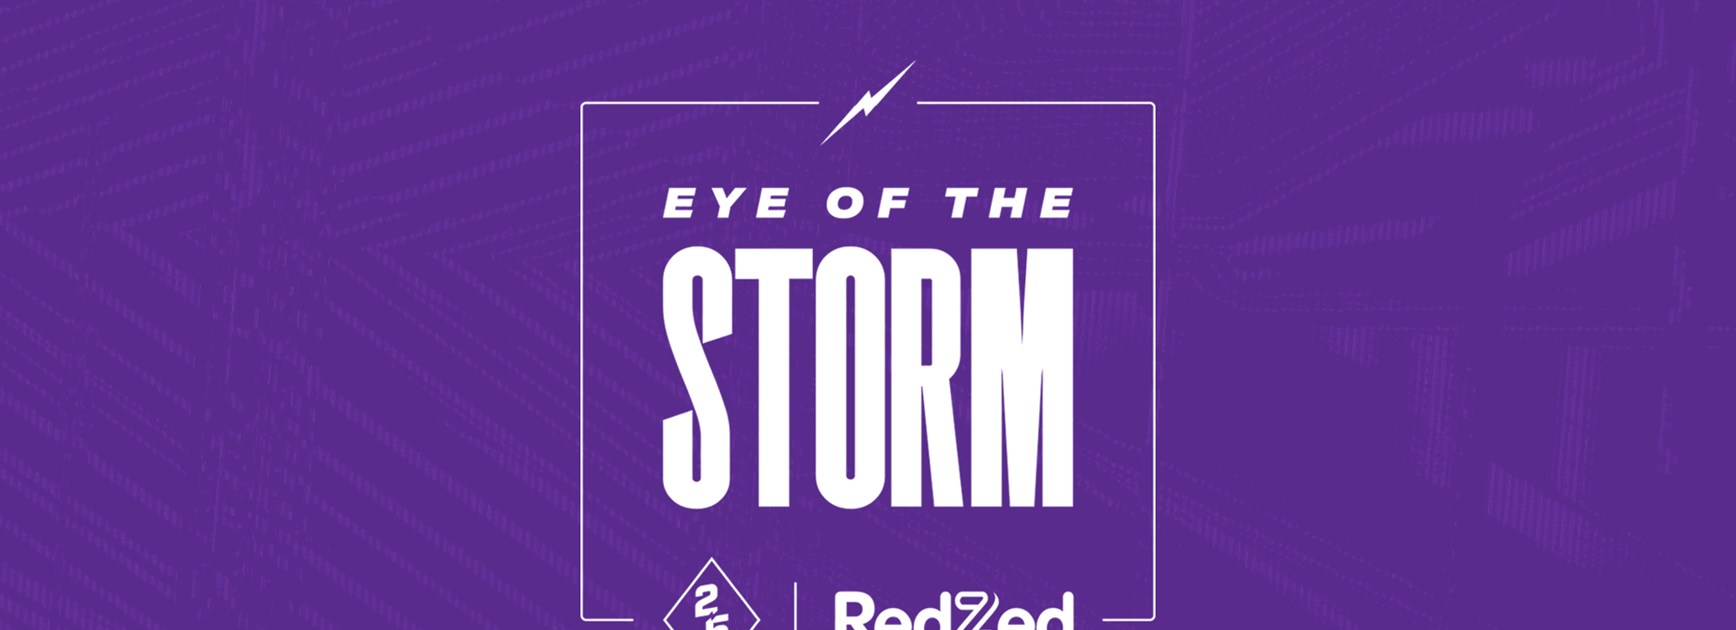 Eye of the Storm Episode 4: Building a squad